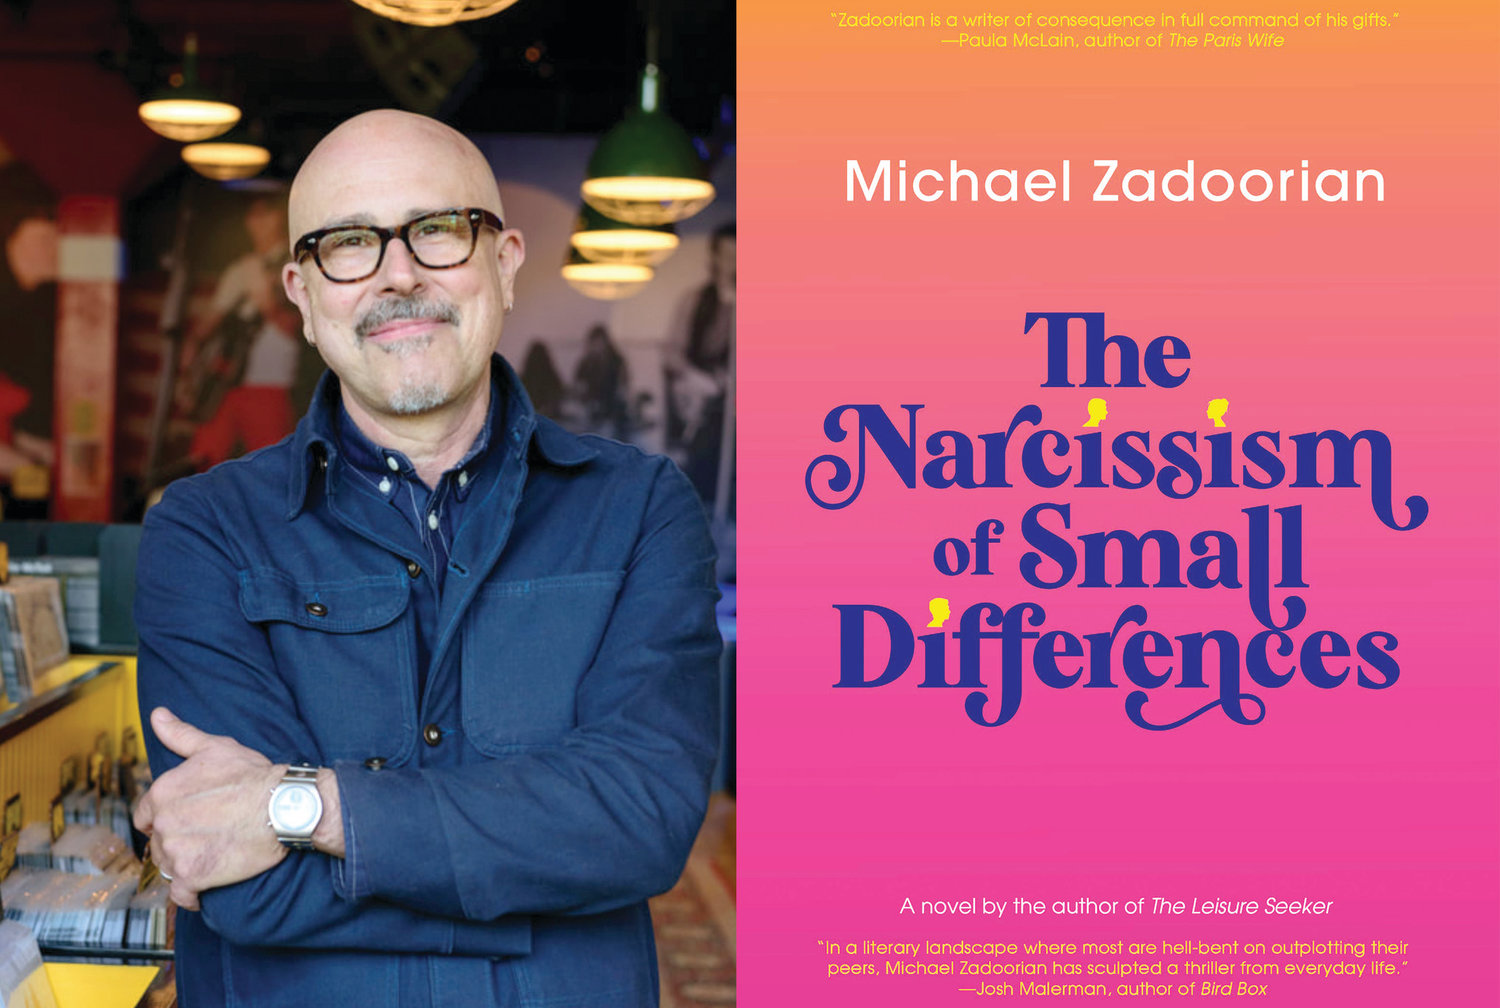 Michael Zadoorian has released his fourth novel, "The Narcissism of Small Differences."